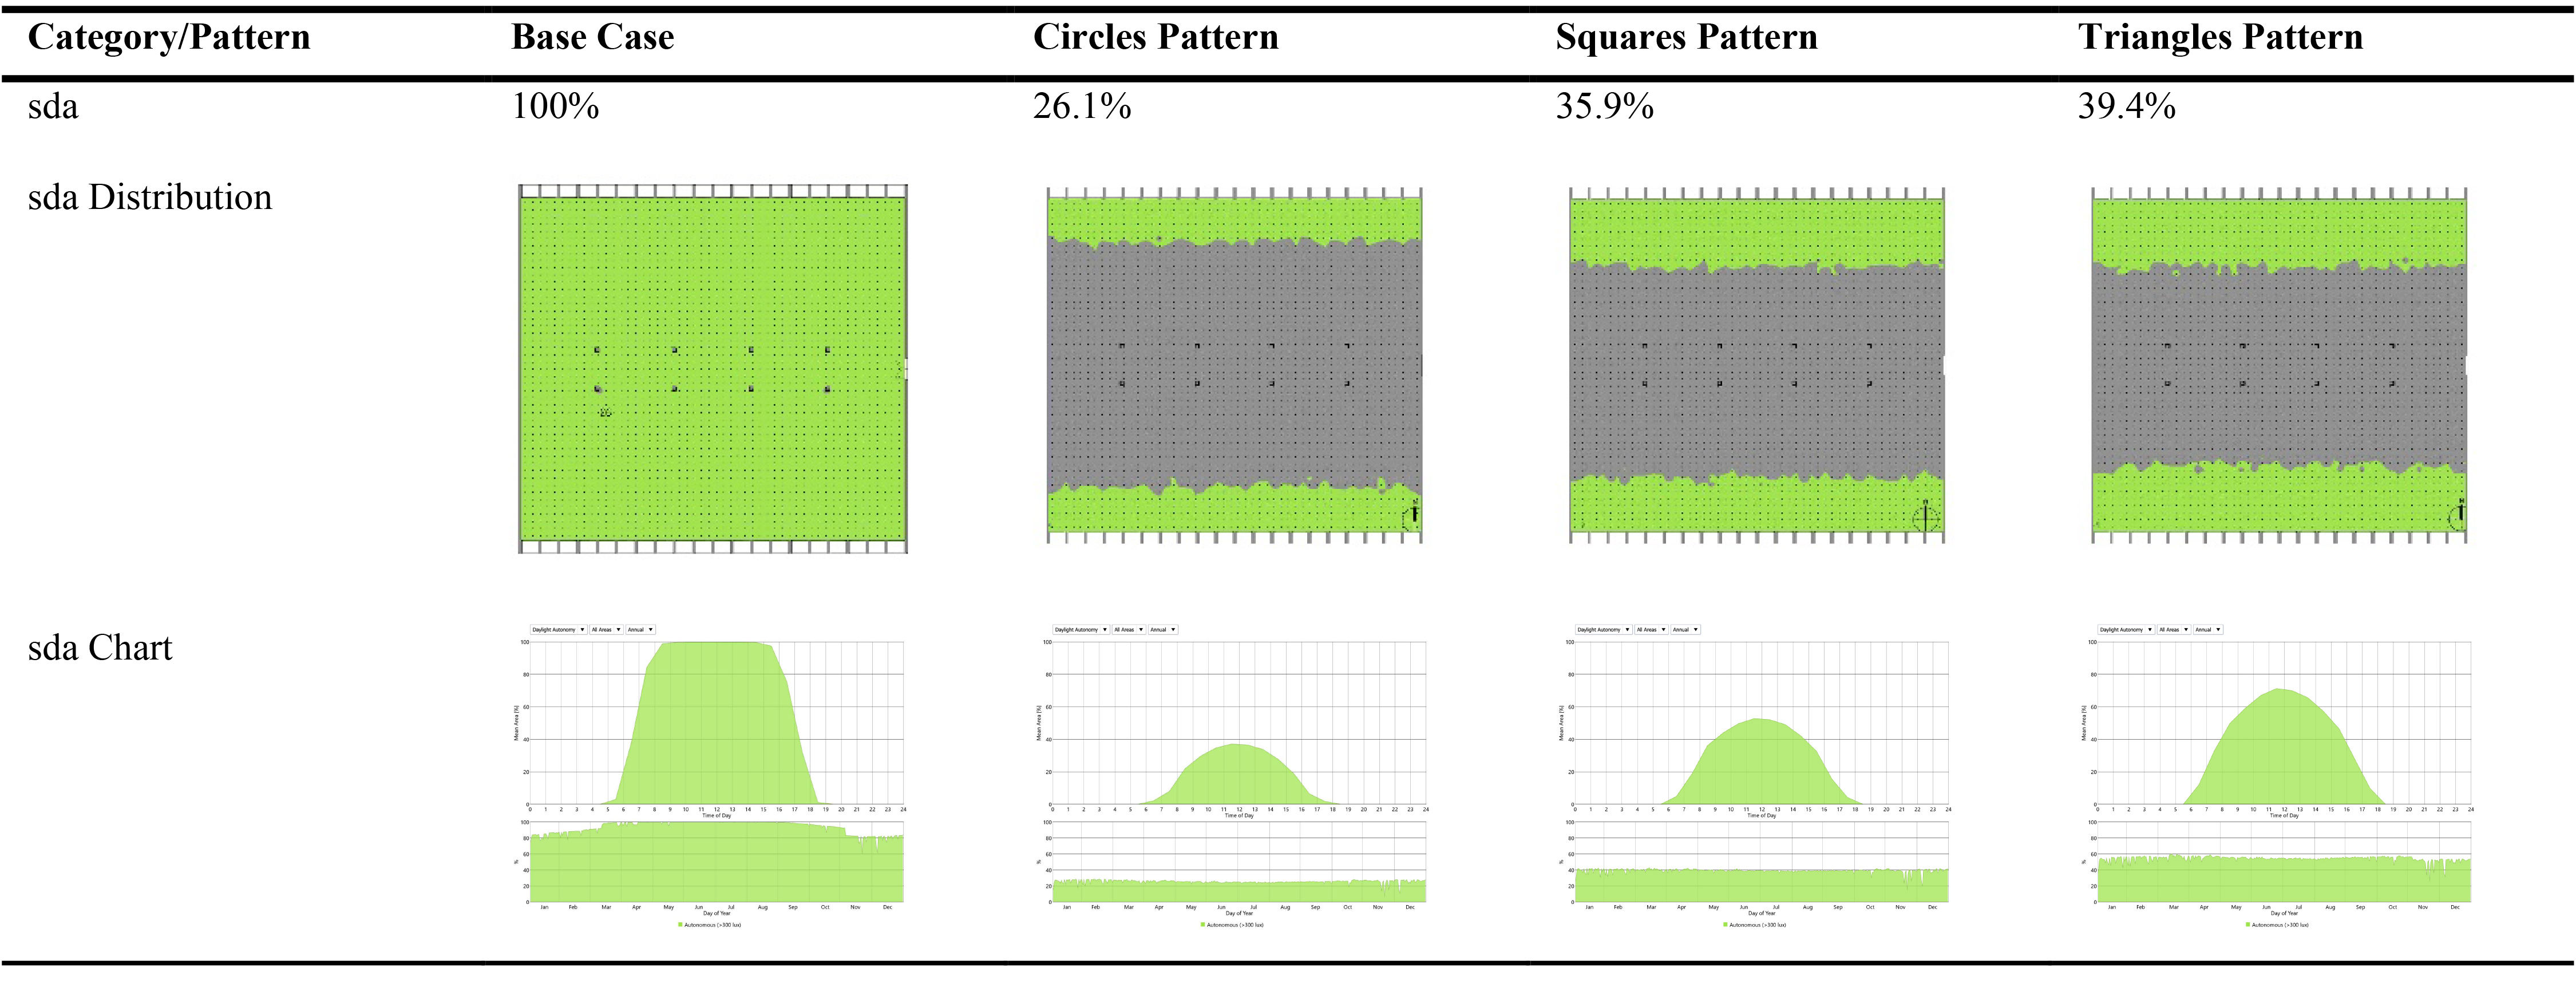 SDA values, distribution and charts for the three patterns.